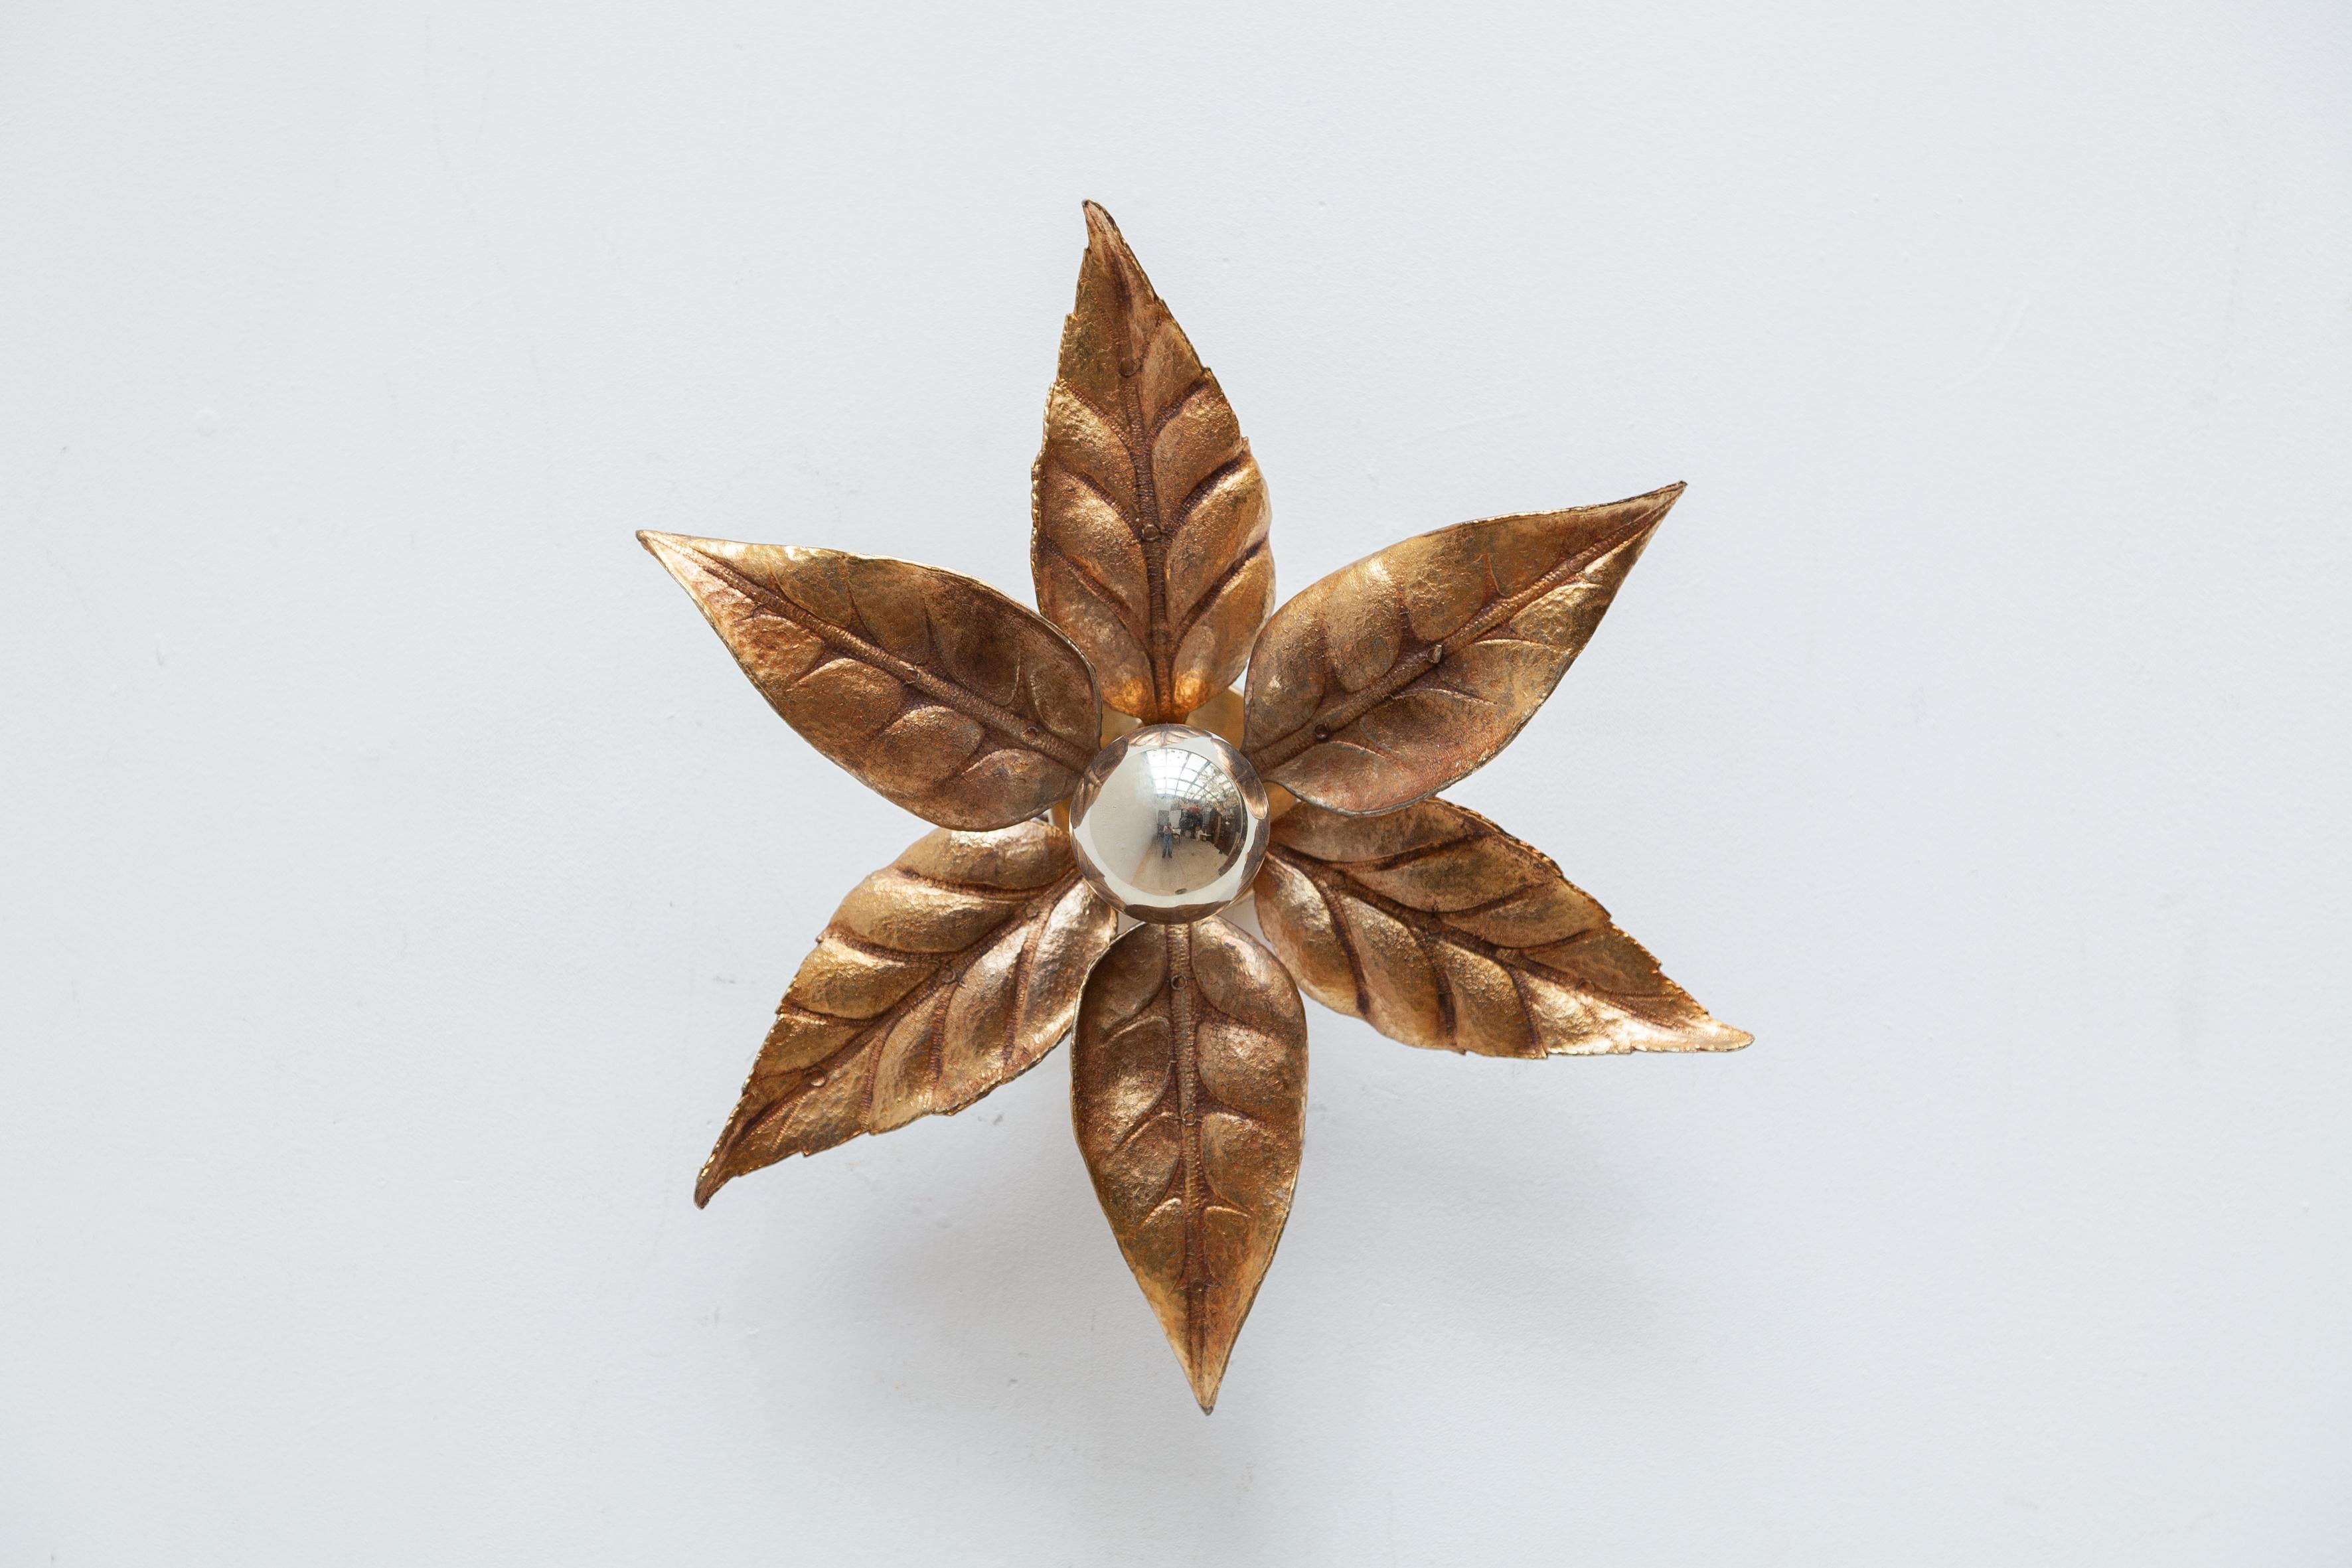 Brass Flower Leave Sconces in style of Willy Daro, 1970s, Belgium 1